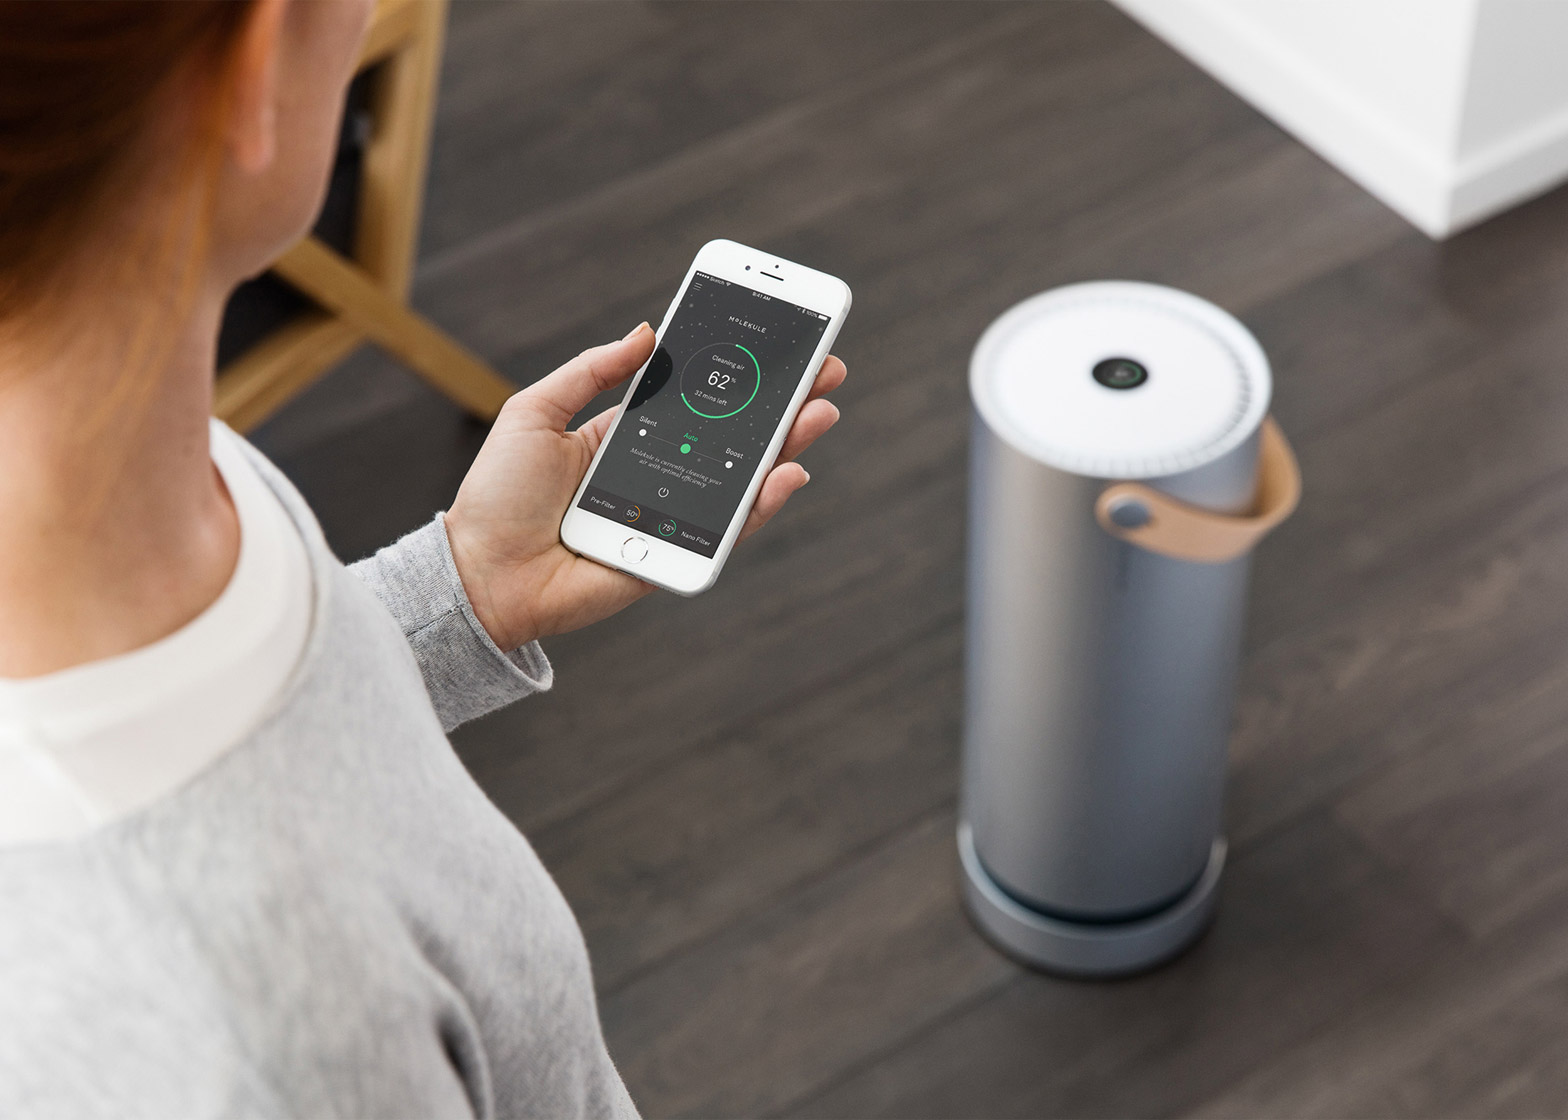 Molekule purifier destroys pollutants rather than collecting them